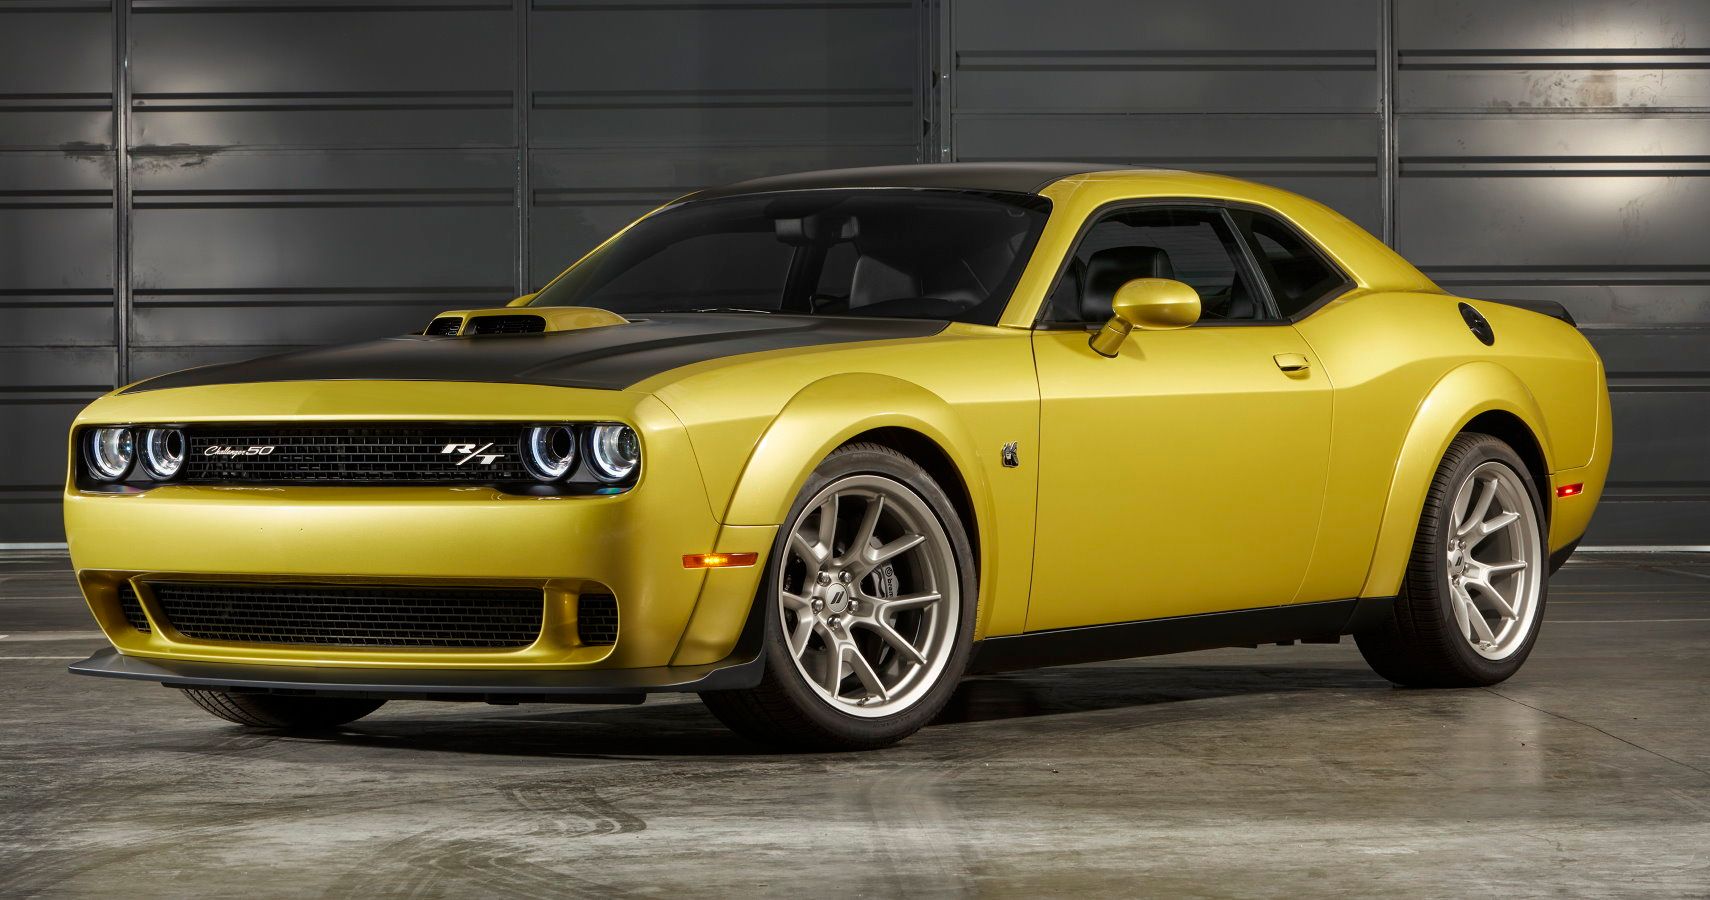 For the first time ever, Shaker hood scoop available on Challenger R/T Scat Pack Widebody with the 50th Anniversary Edition.